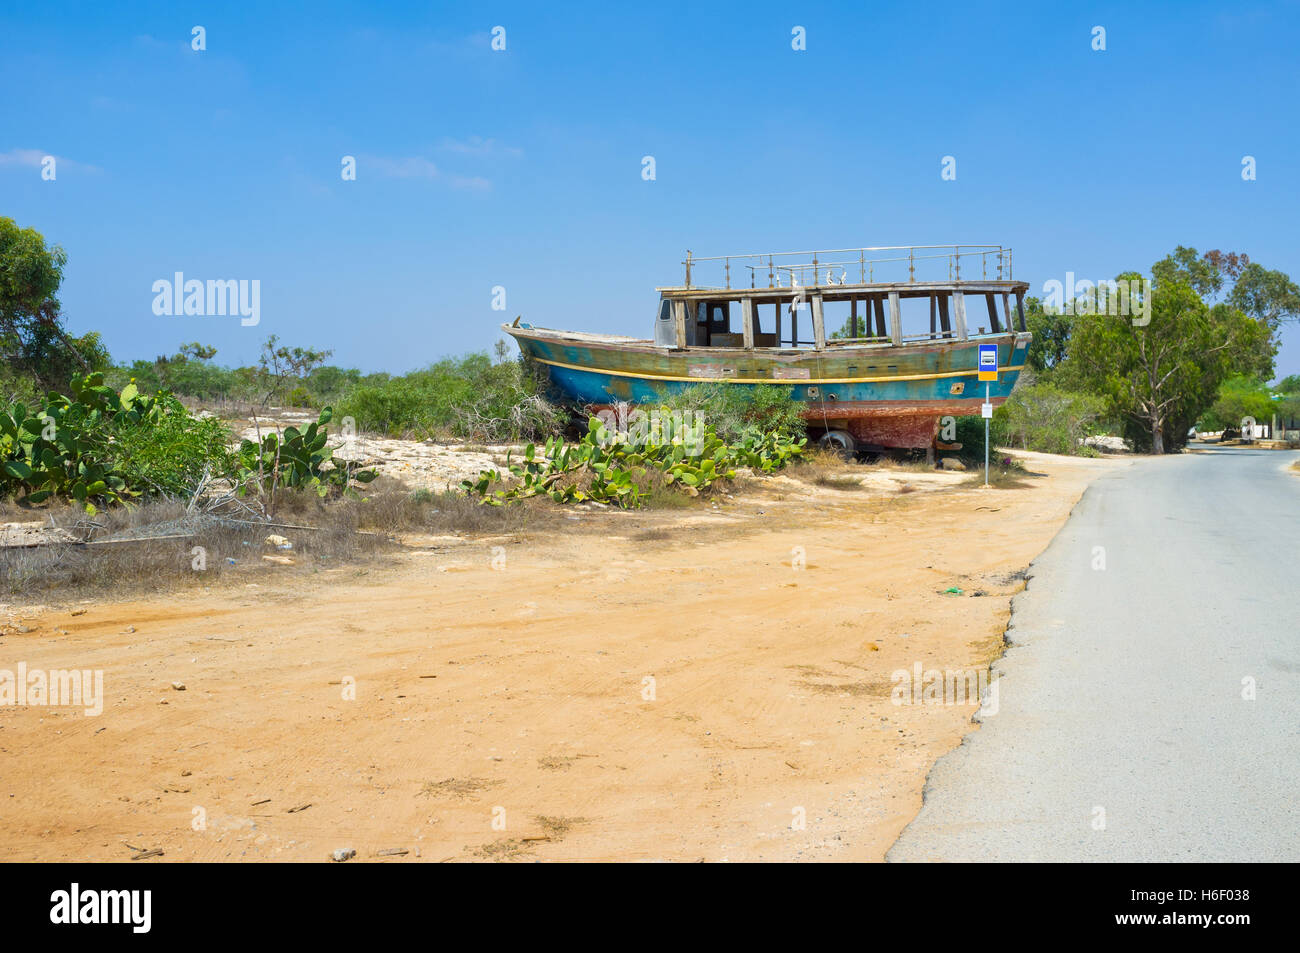 The old wooden ship is the symbol of the fishing village, so it stands next to the bus station at the village entrance, Liopetri Stock Photo